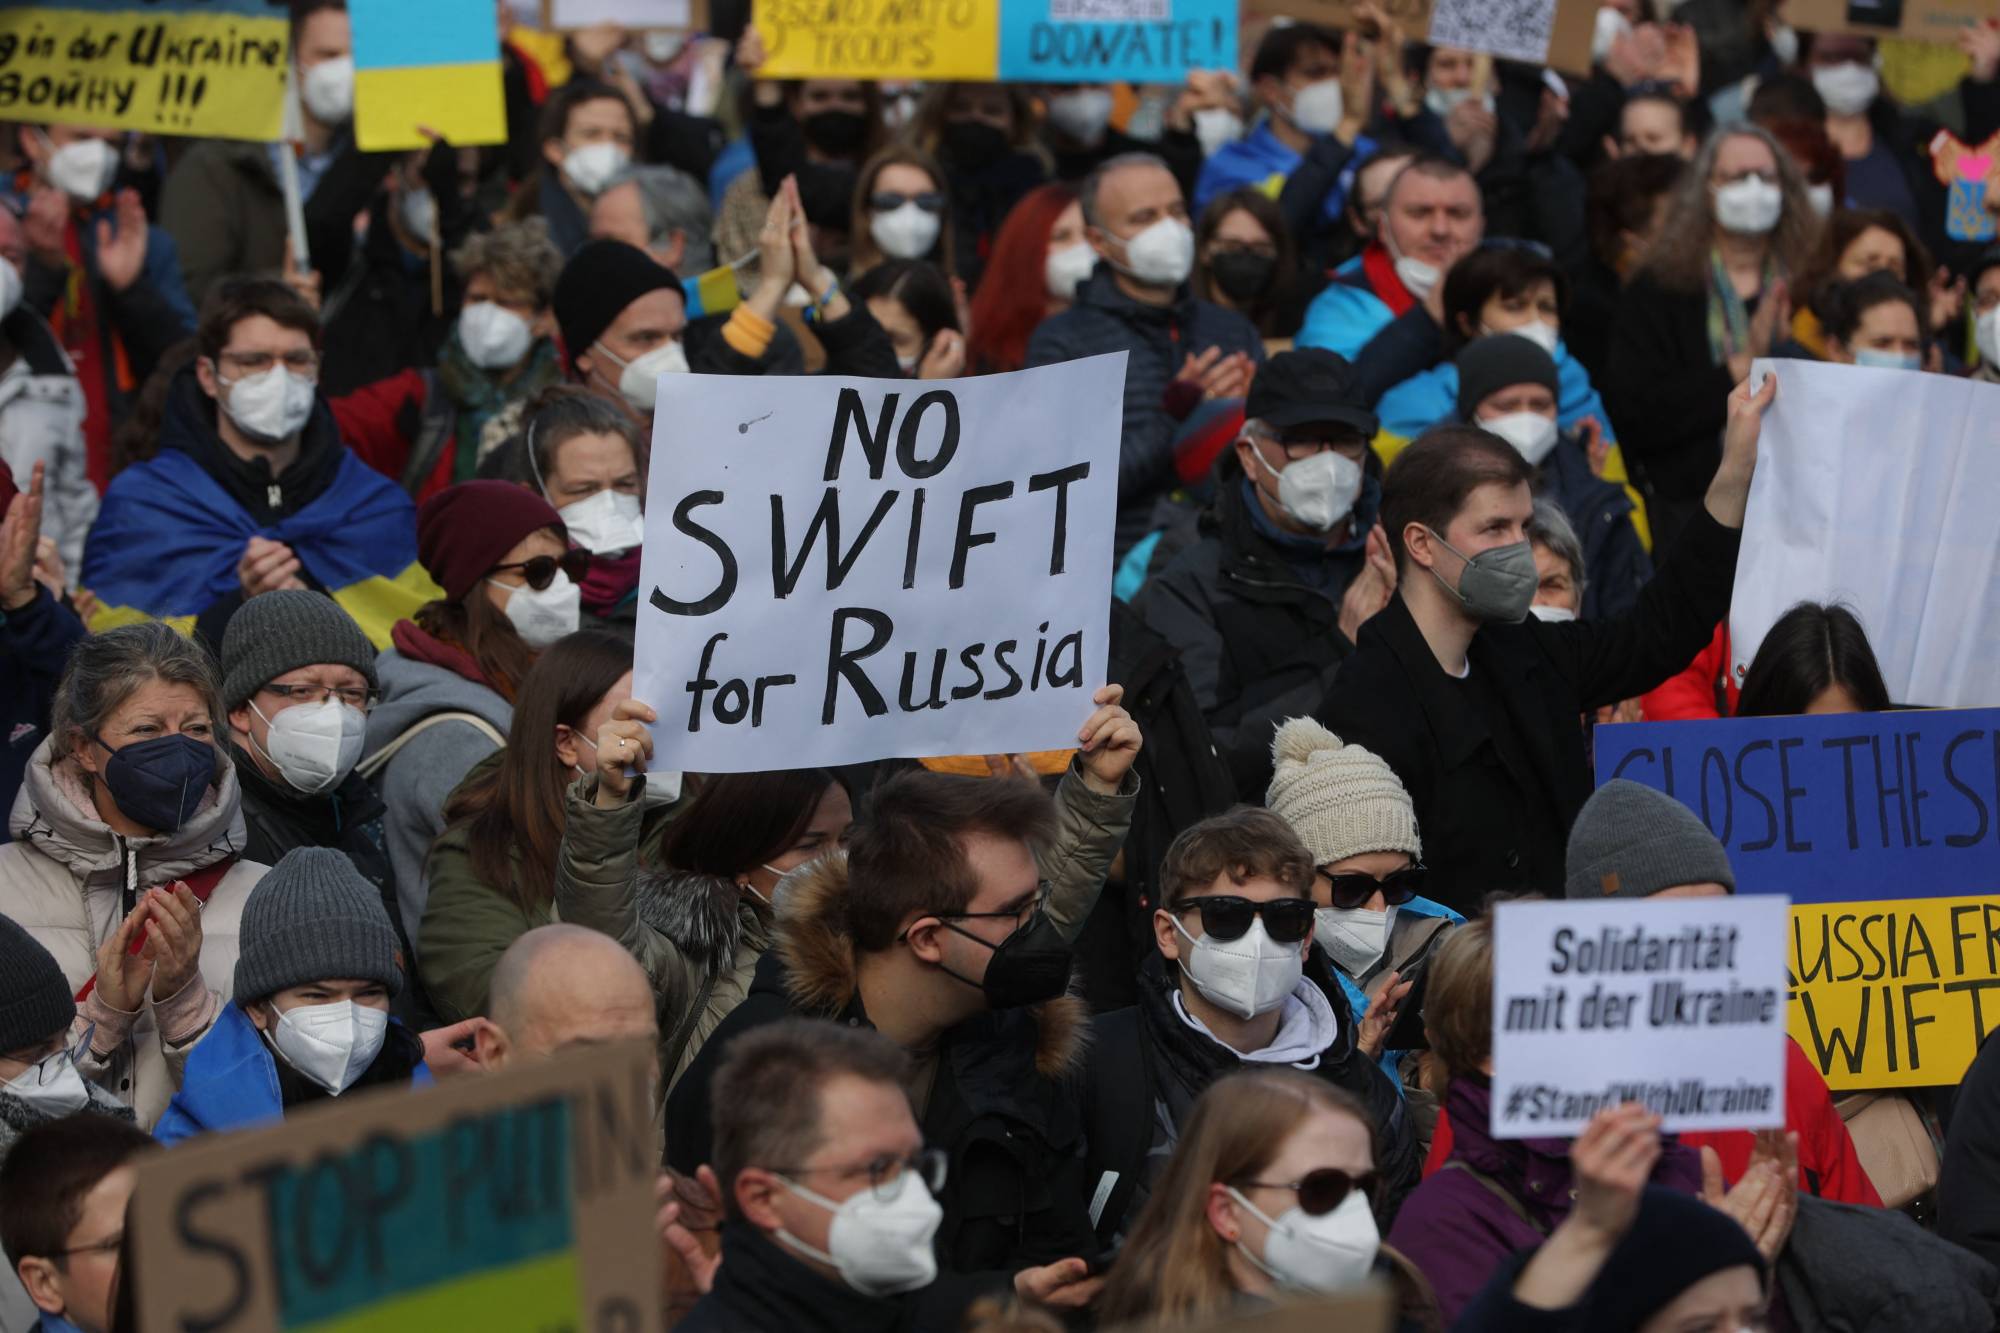 A protester holds a placard reading 'No SWIFT for Russia' during a rally against Russia's invasion of Ukraine, on Saturday in Frankfurt. | AFP-JIJI